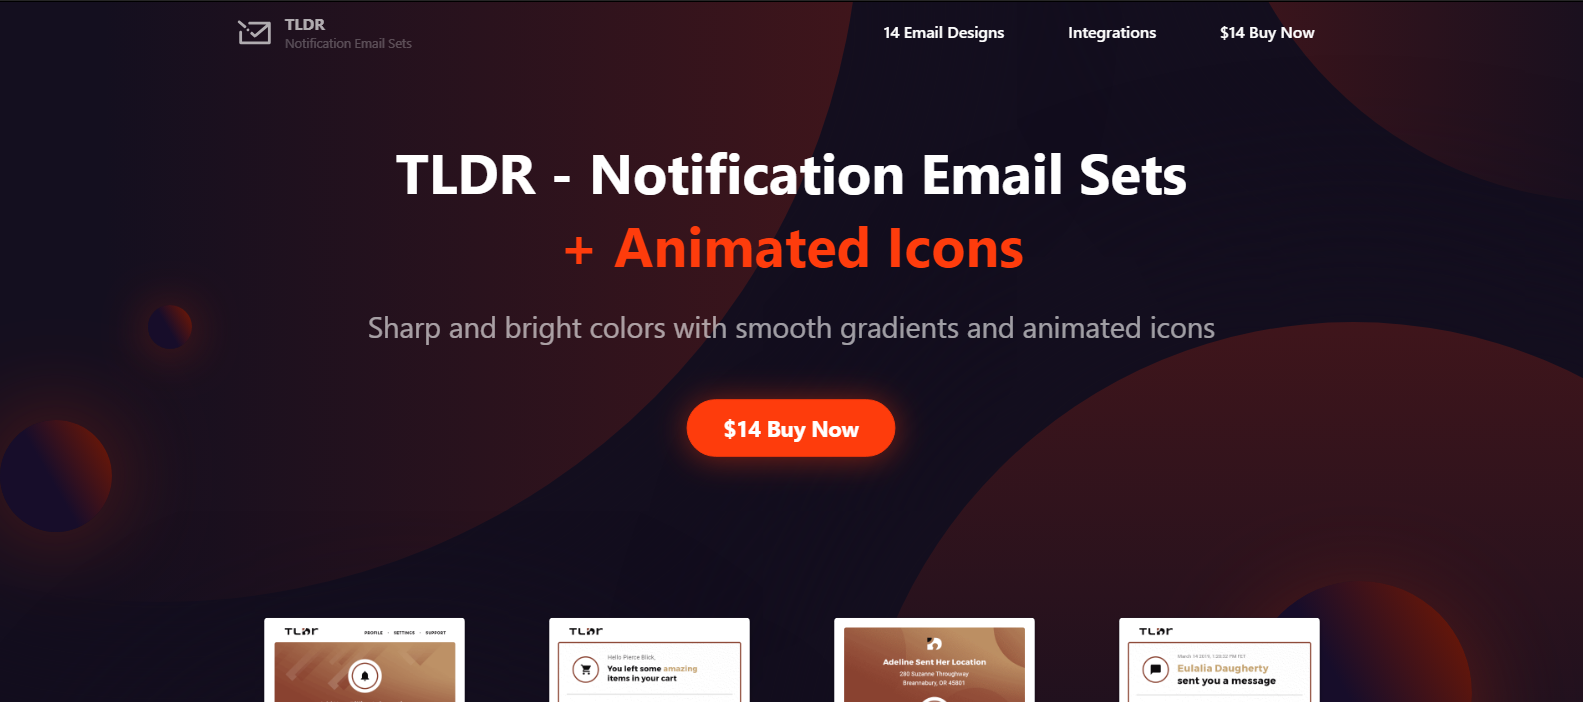 TLDR - Notification Email Sets + Animated Icons